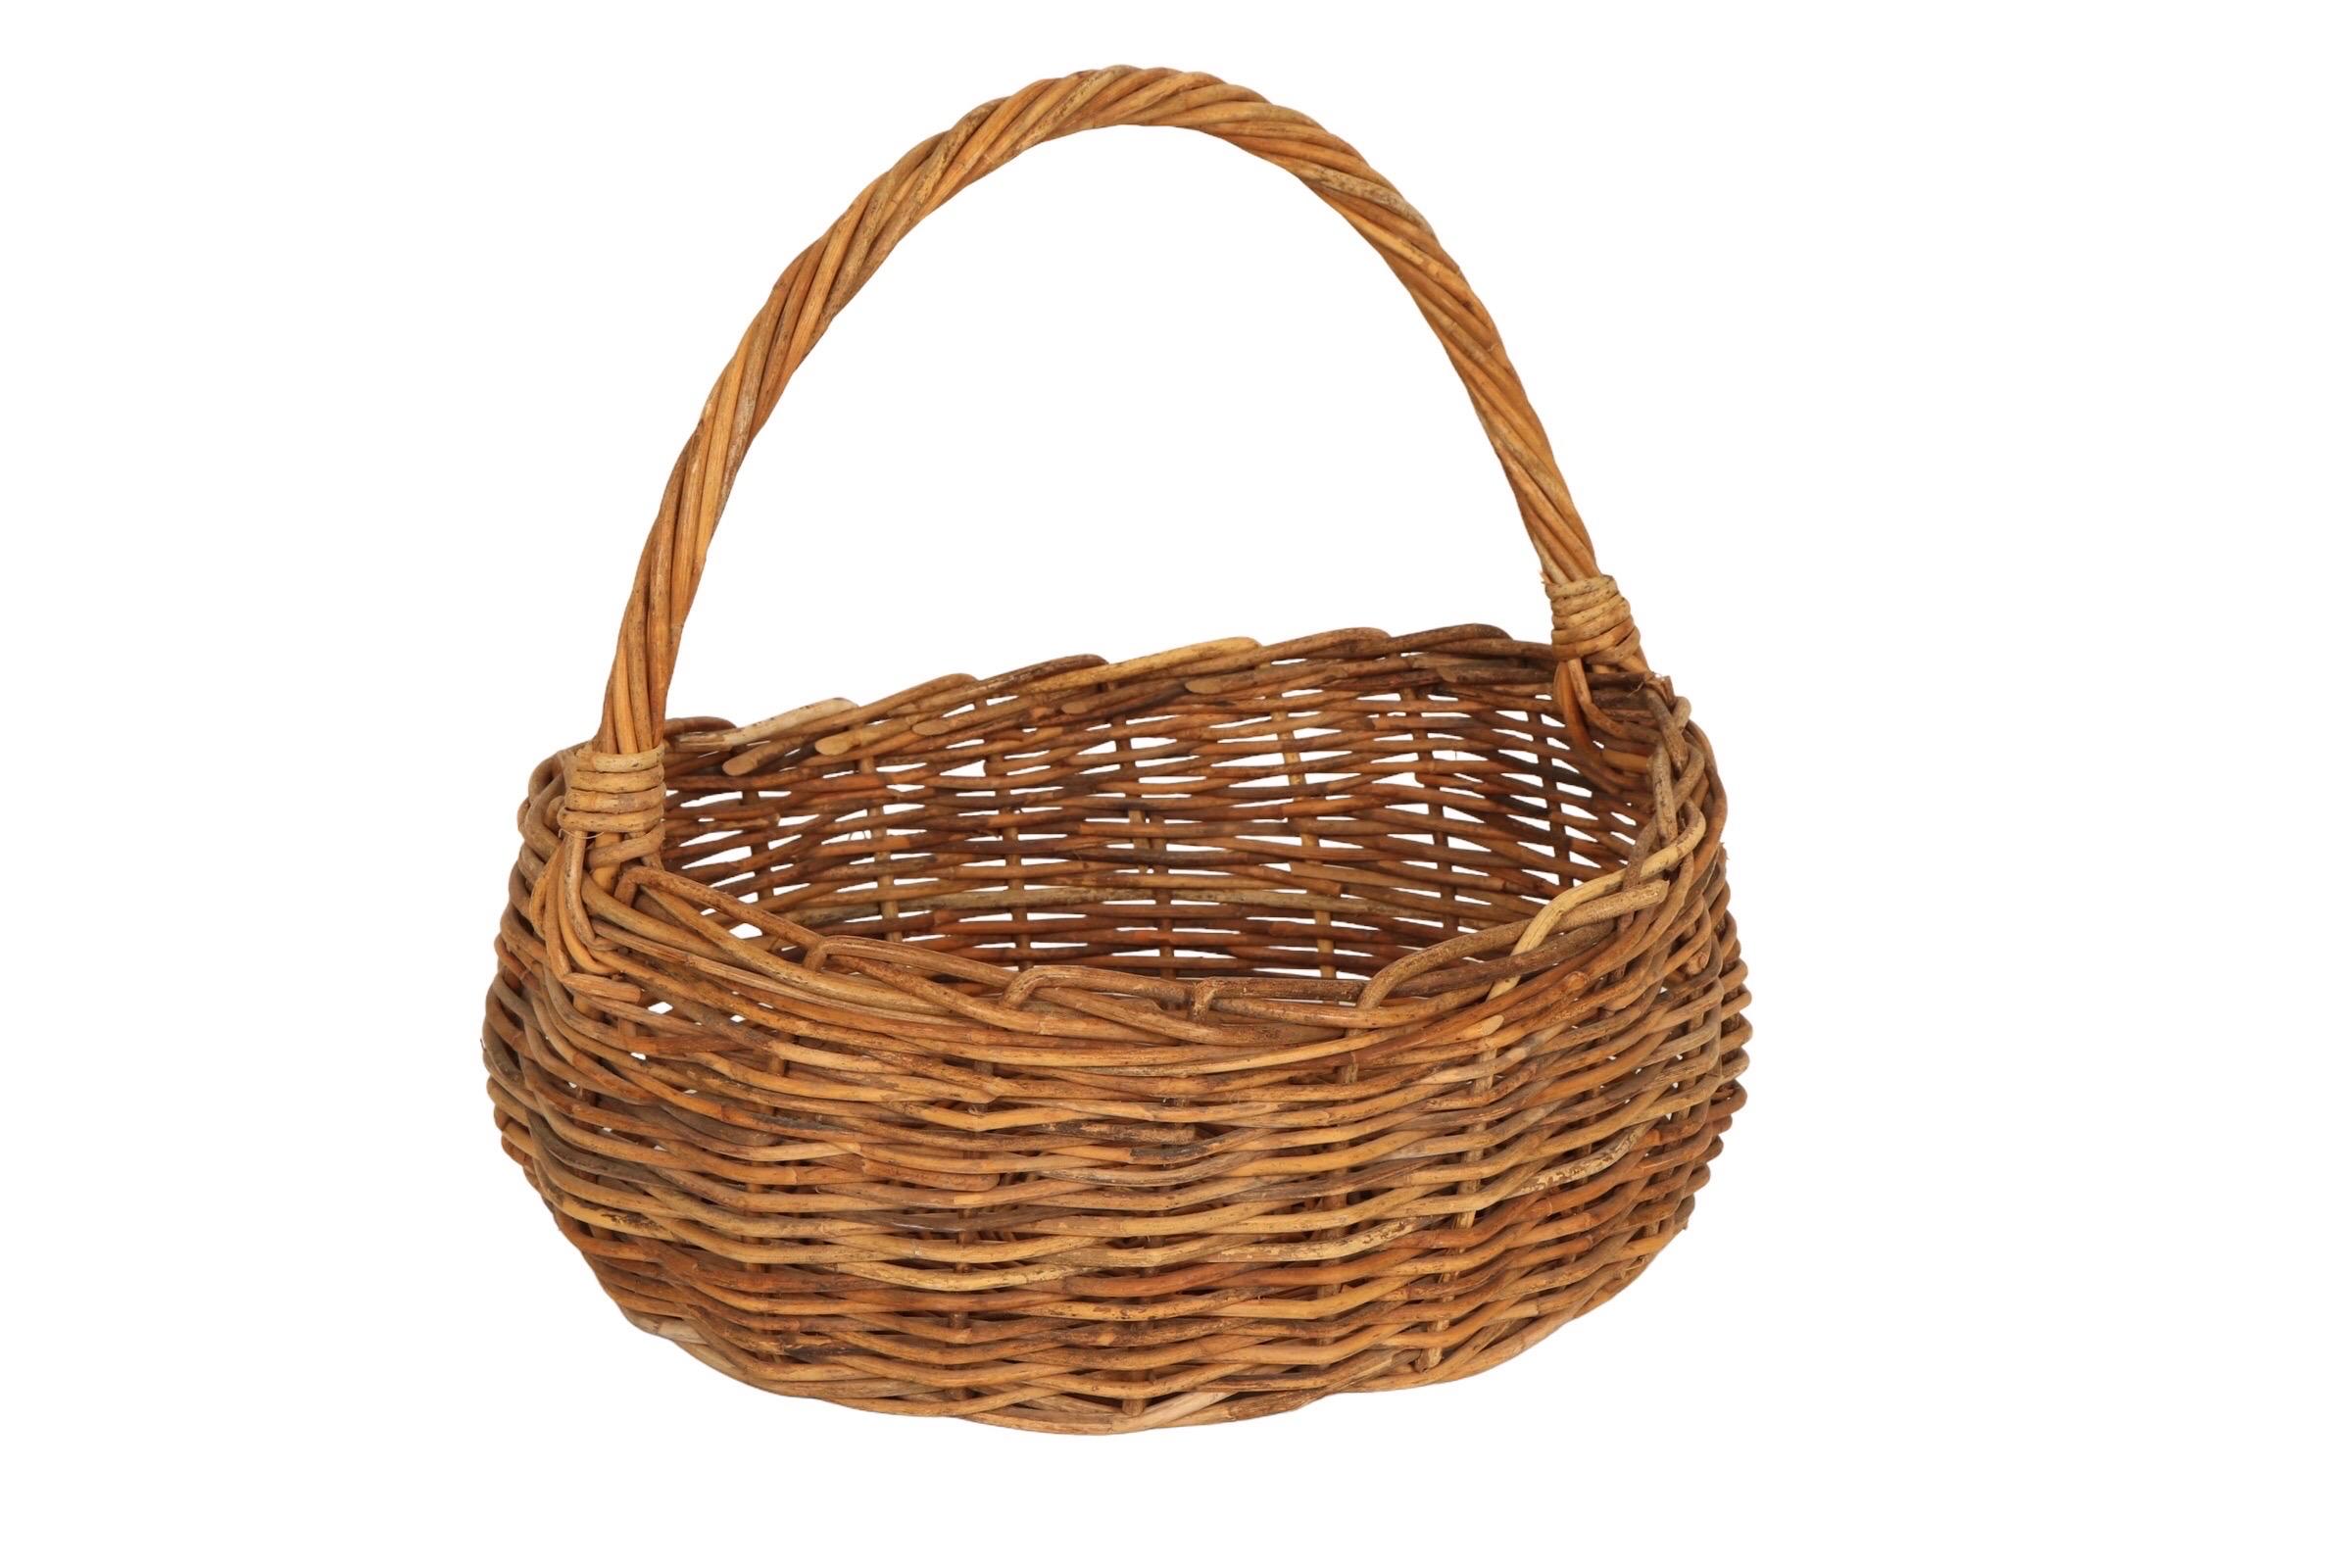 A classic French style oval shopping basket made of woven wicker. An arch like handle is made with twisted wicker woven into the sides of the basket. Decorated with a braided edge.